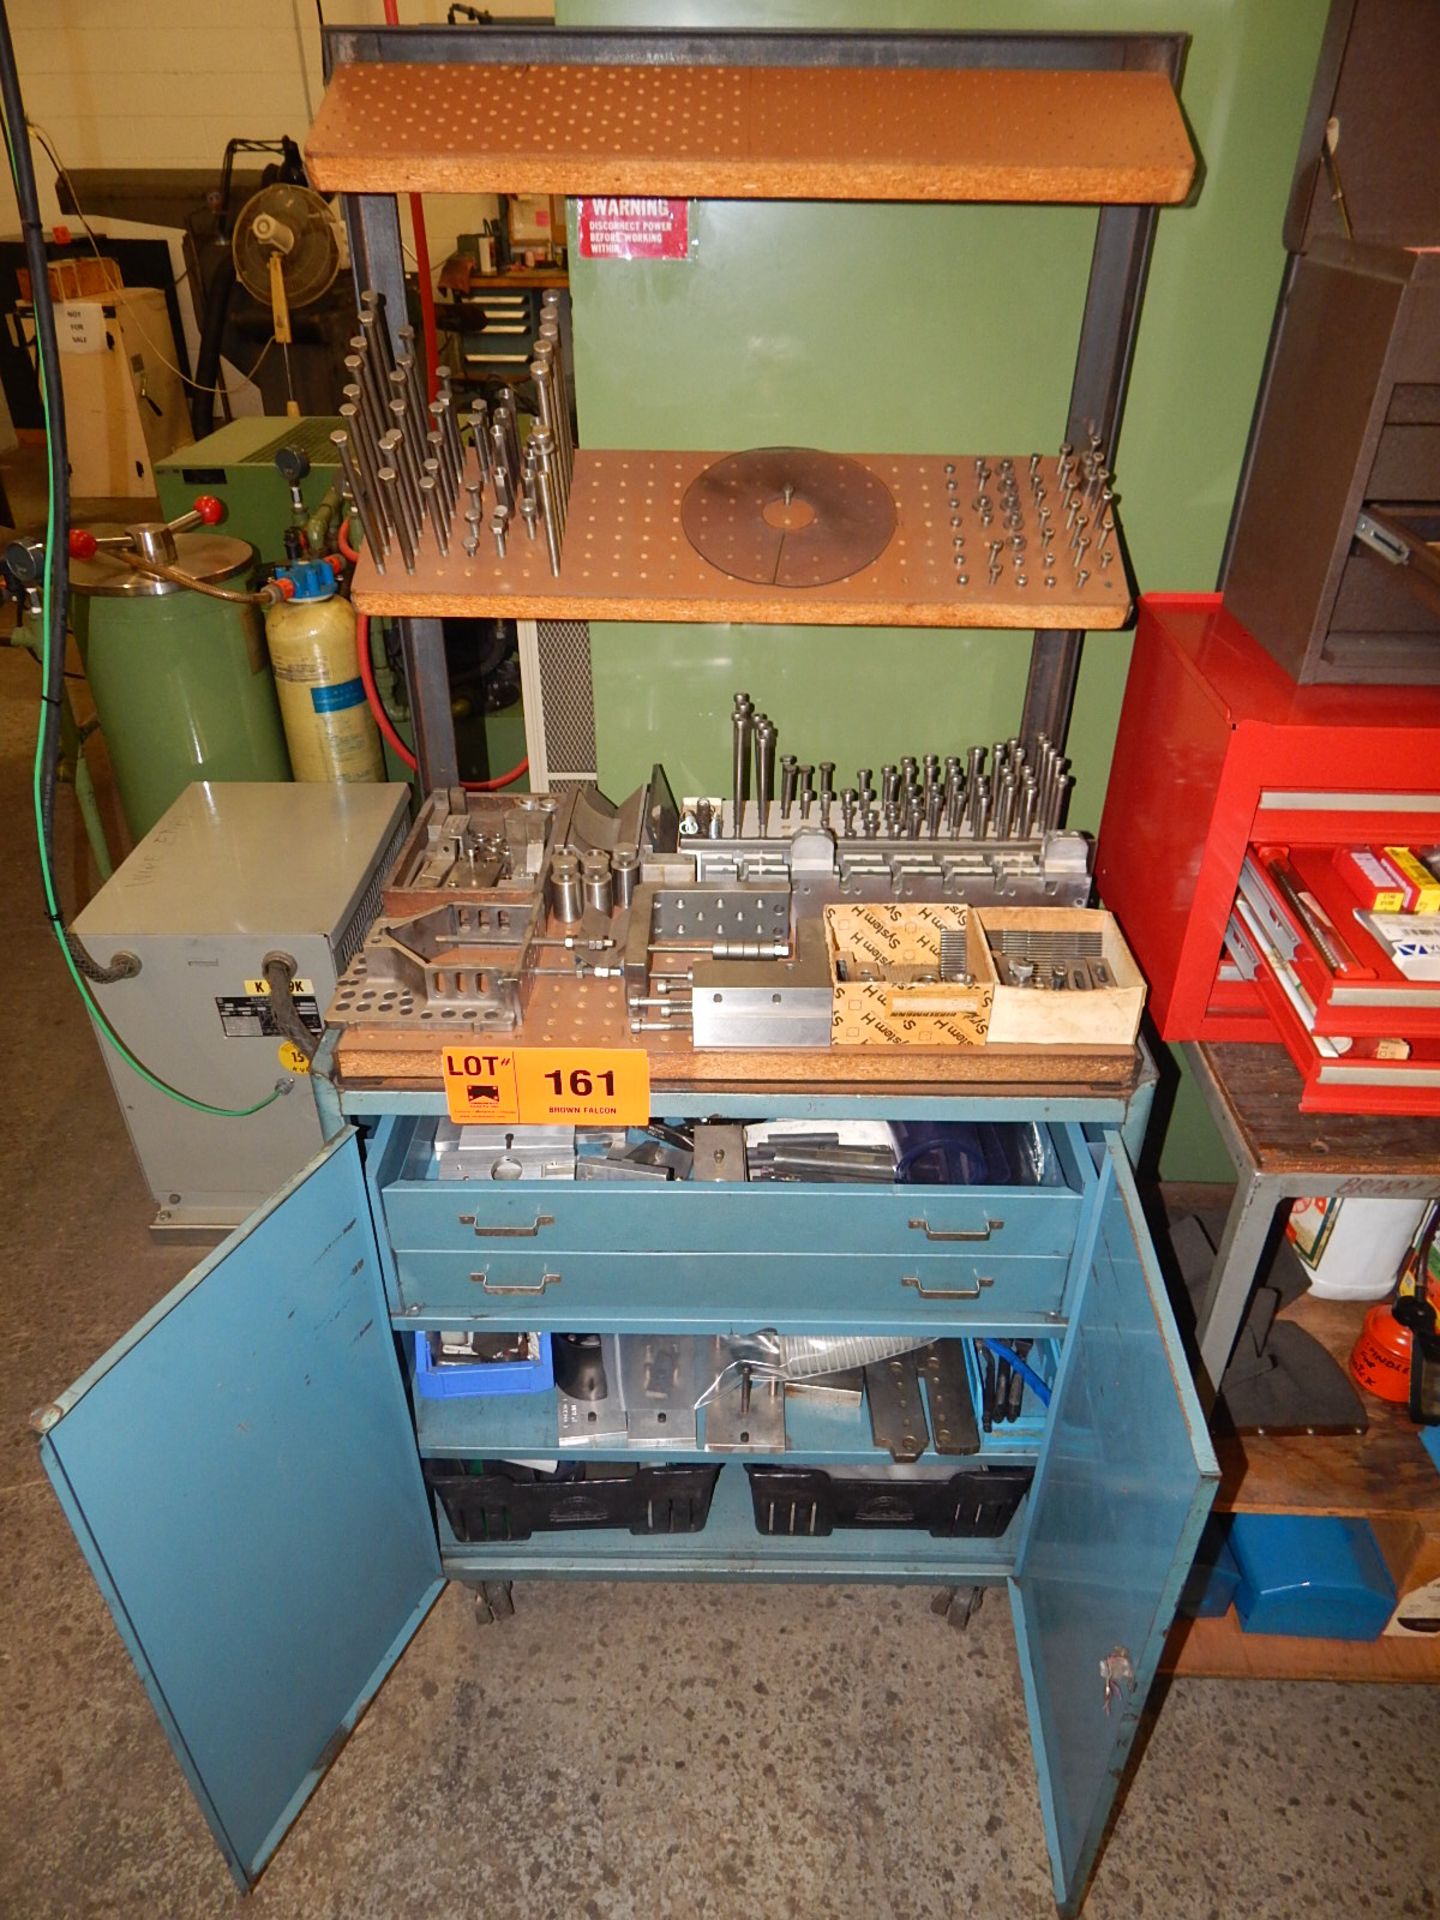 LOT/ CABINET WITH CONTENTS - EDM TOOLING